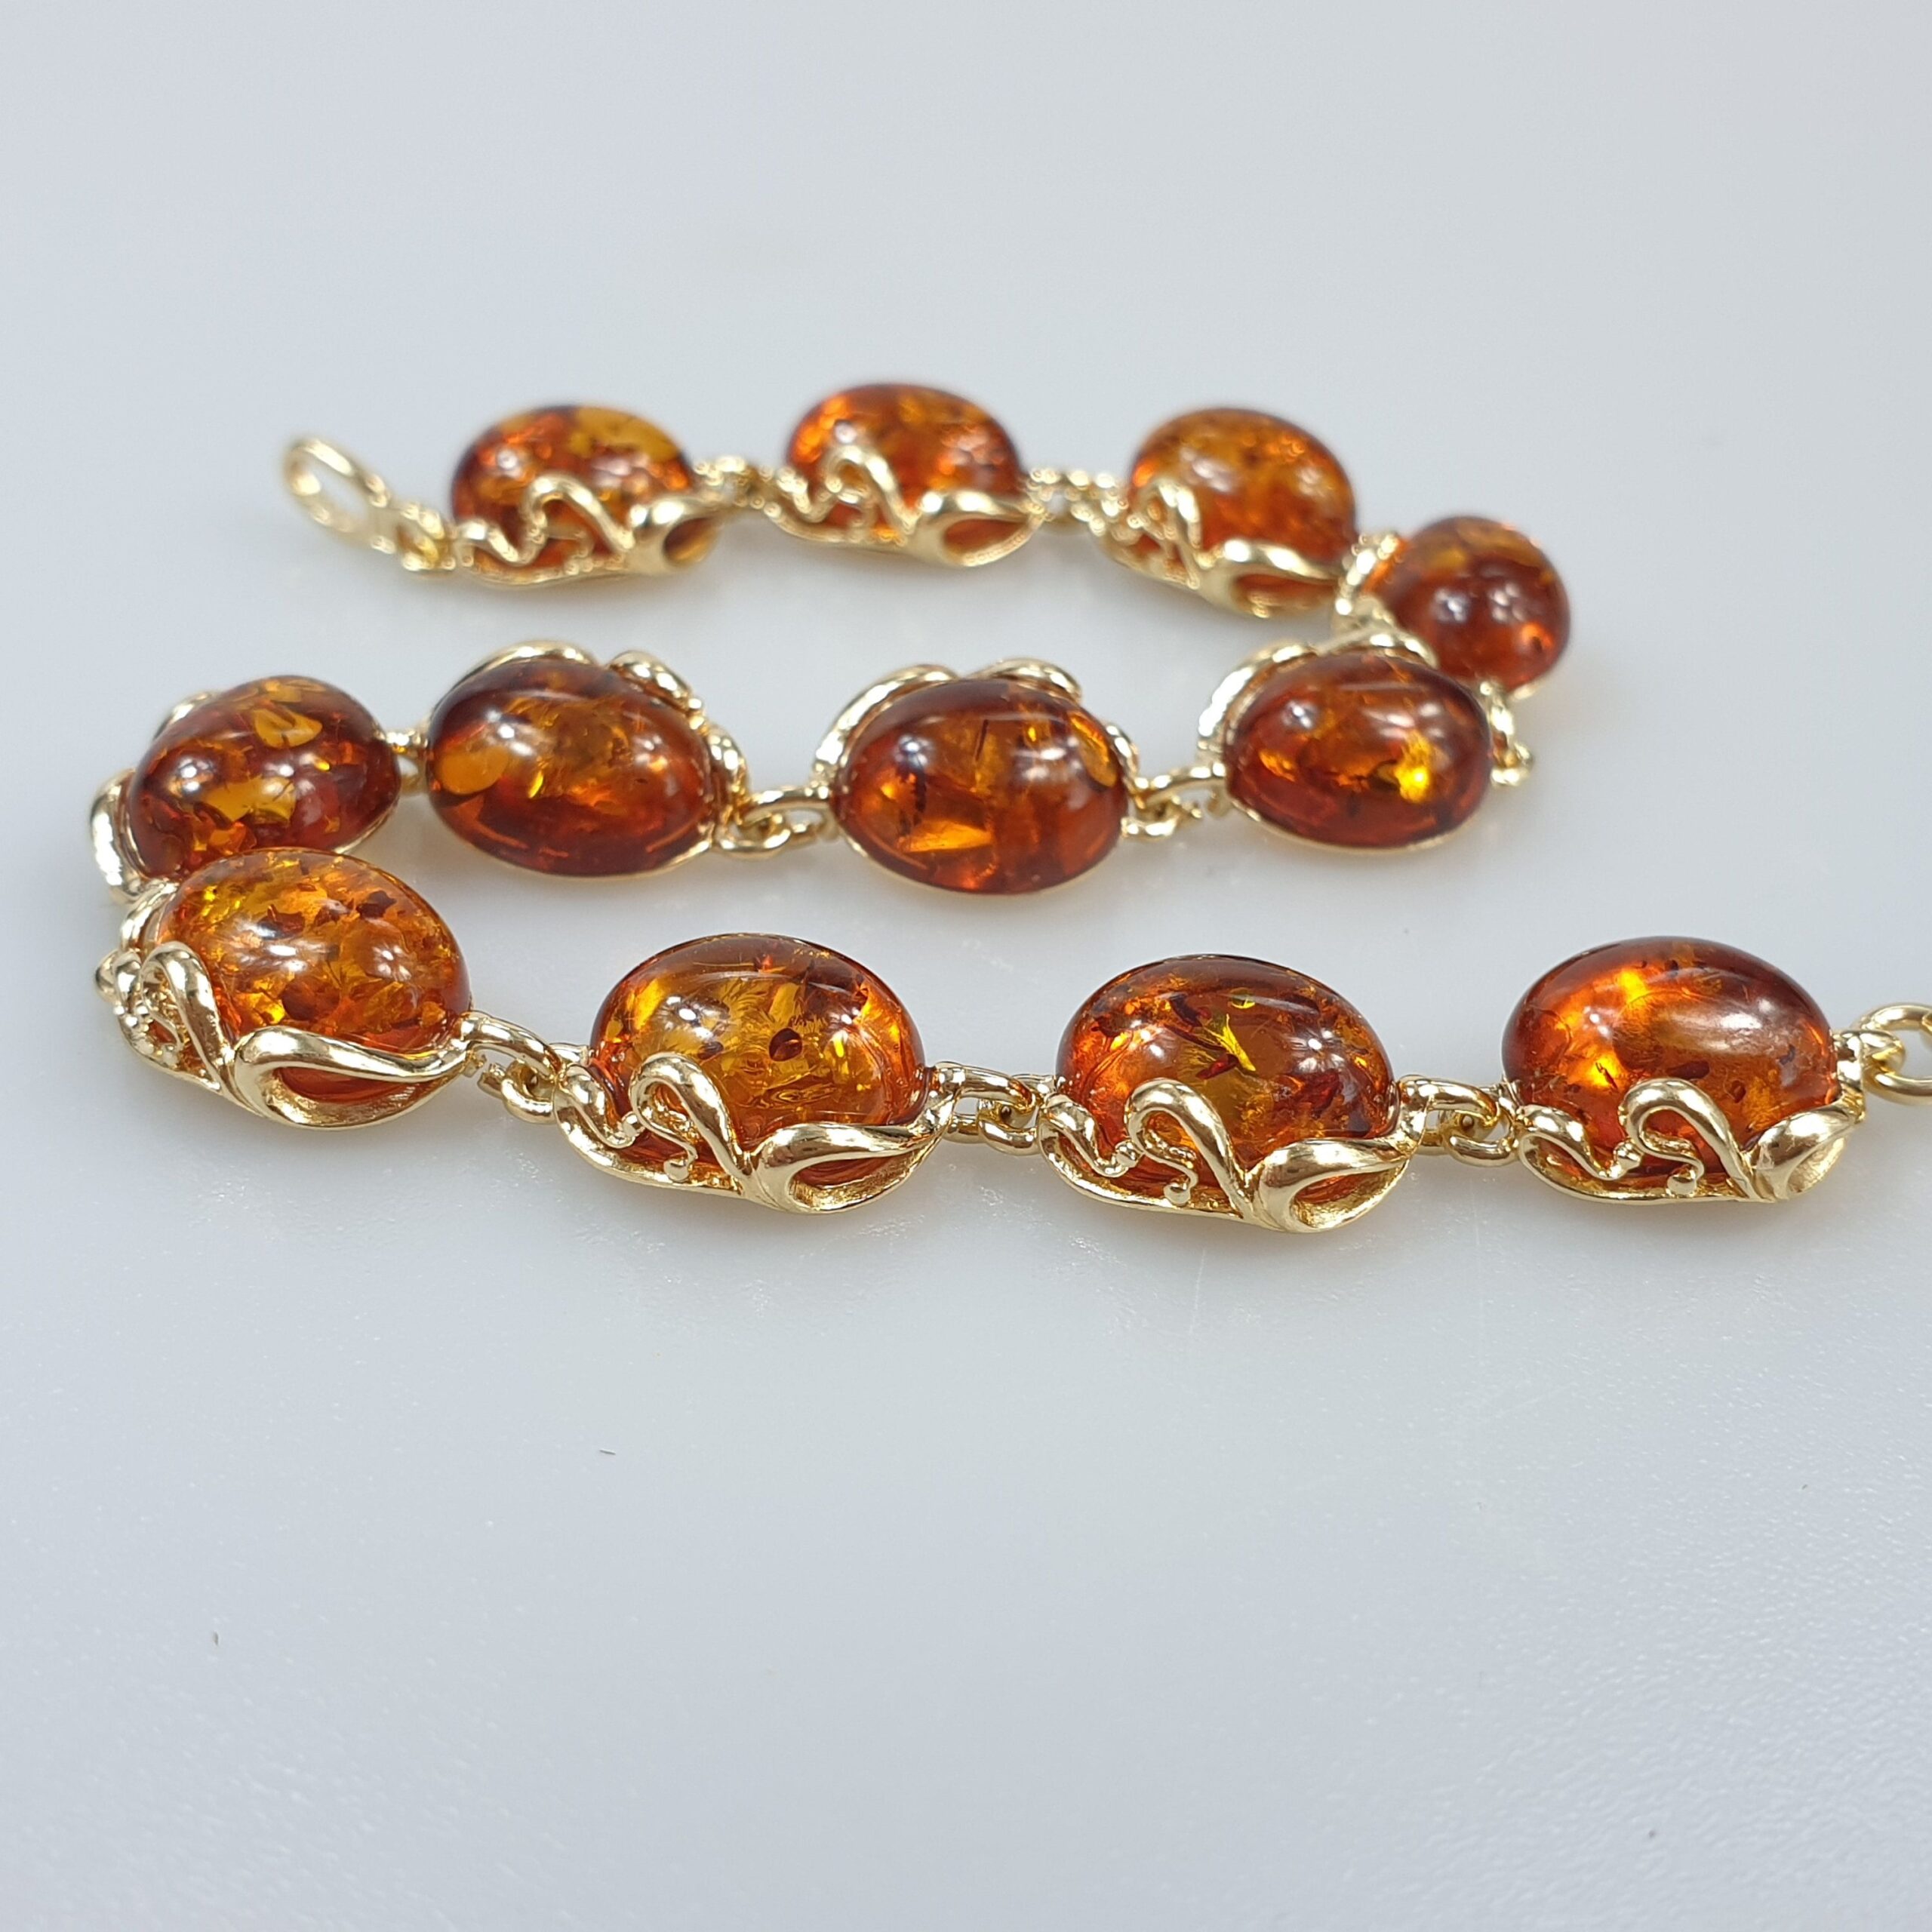 Add richness to your look by grabbing Amber bracelet